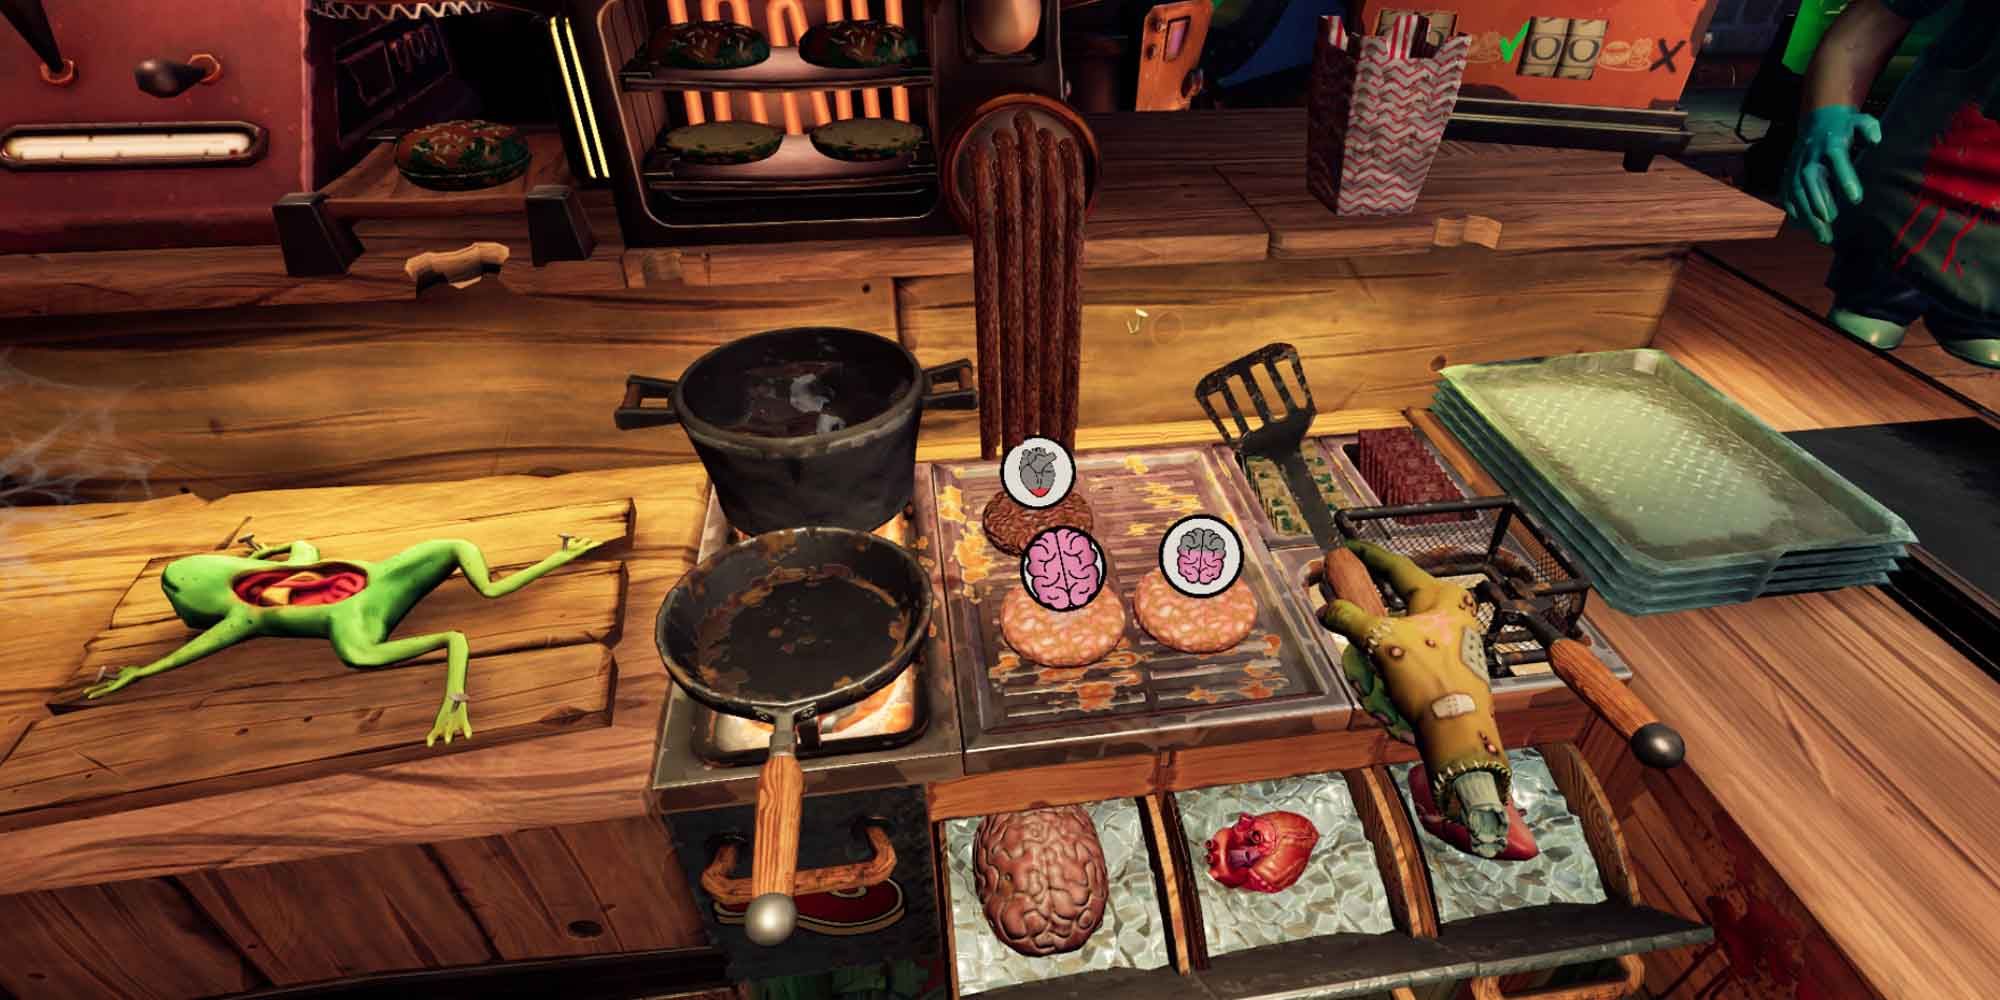 Working the grill in Horror Bar VR